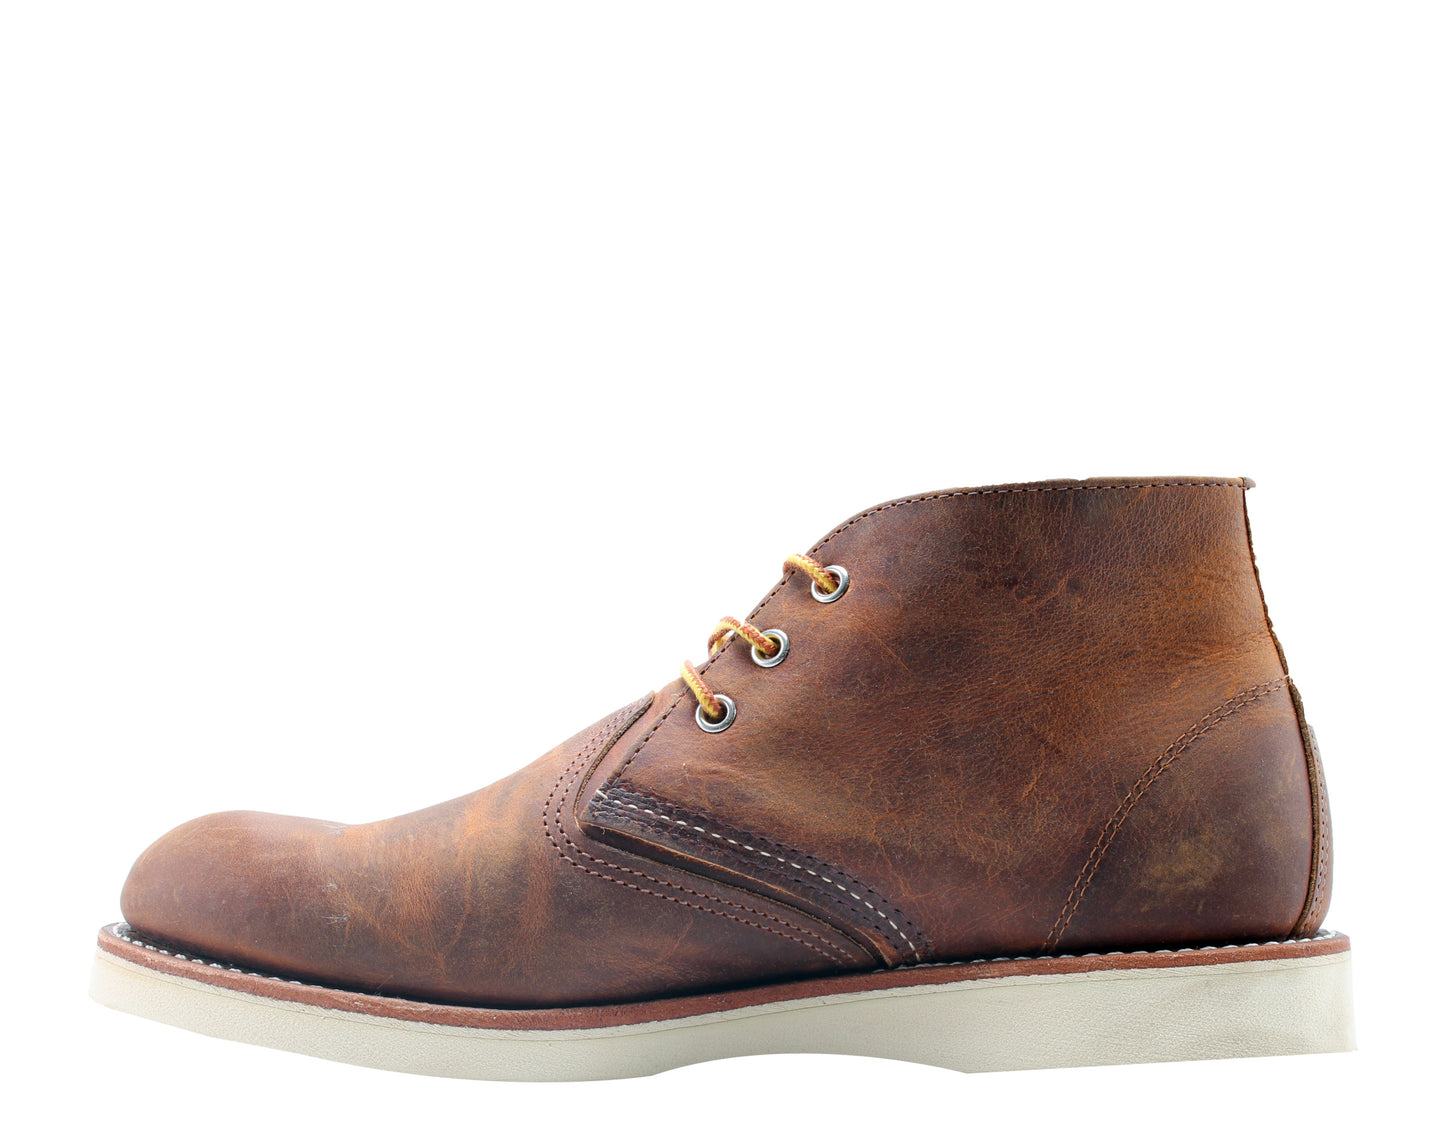 Red Wing Heritage Classic Chukka 3137 Men's Boots